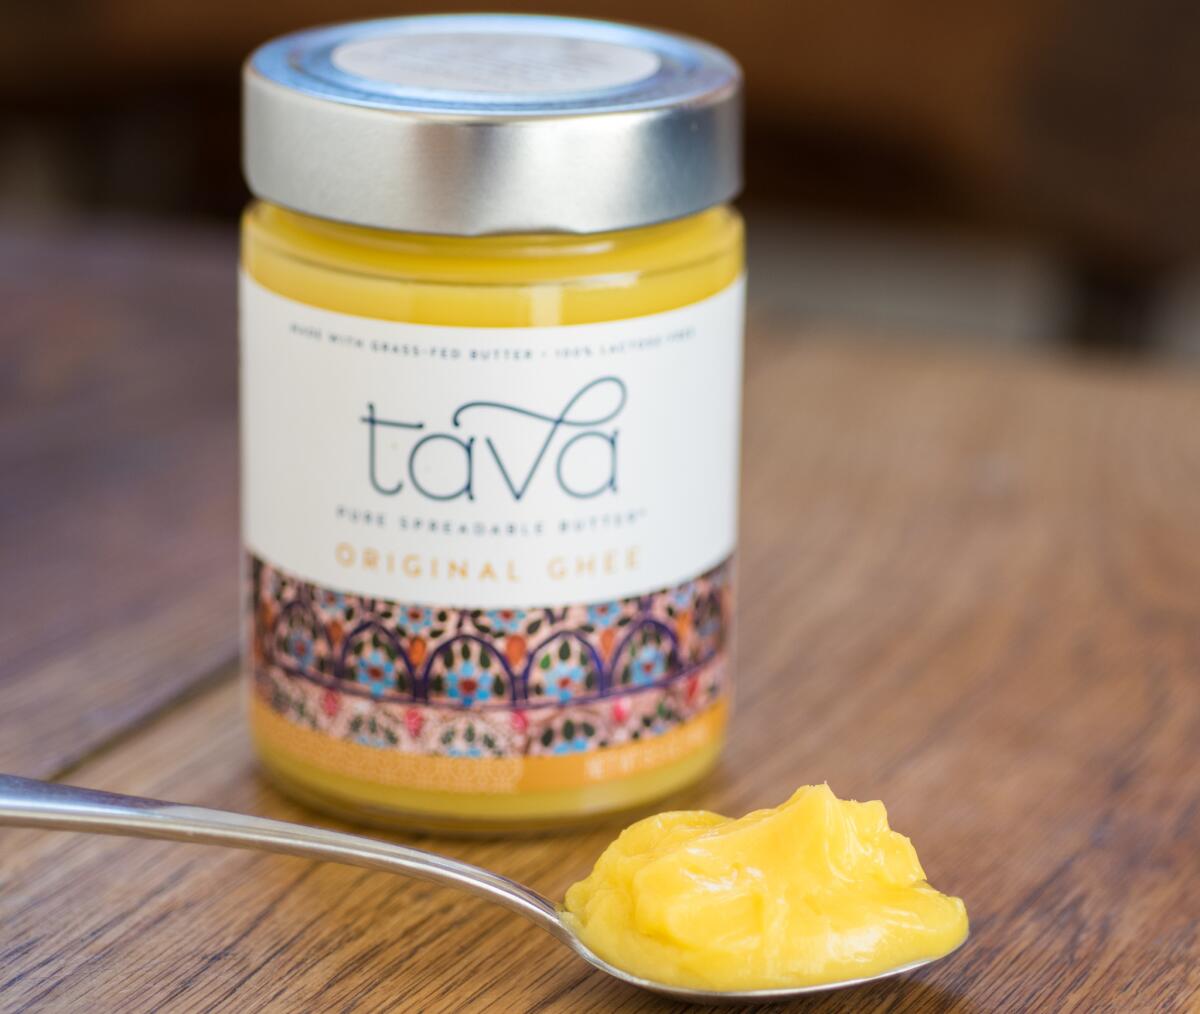 Tava Life Provisions makes 500 jars daily of ghee, an ancient style of clarified butter that originated in India, at a commercial kitchen in Lincoln Heights. The company expects to be in 50 stores nationwide by the end of July.